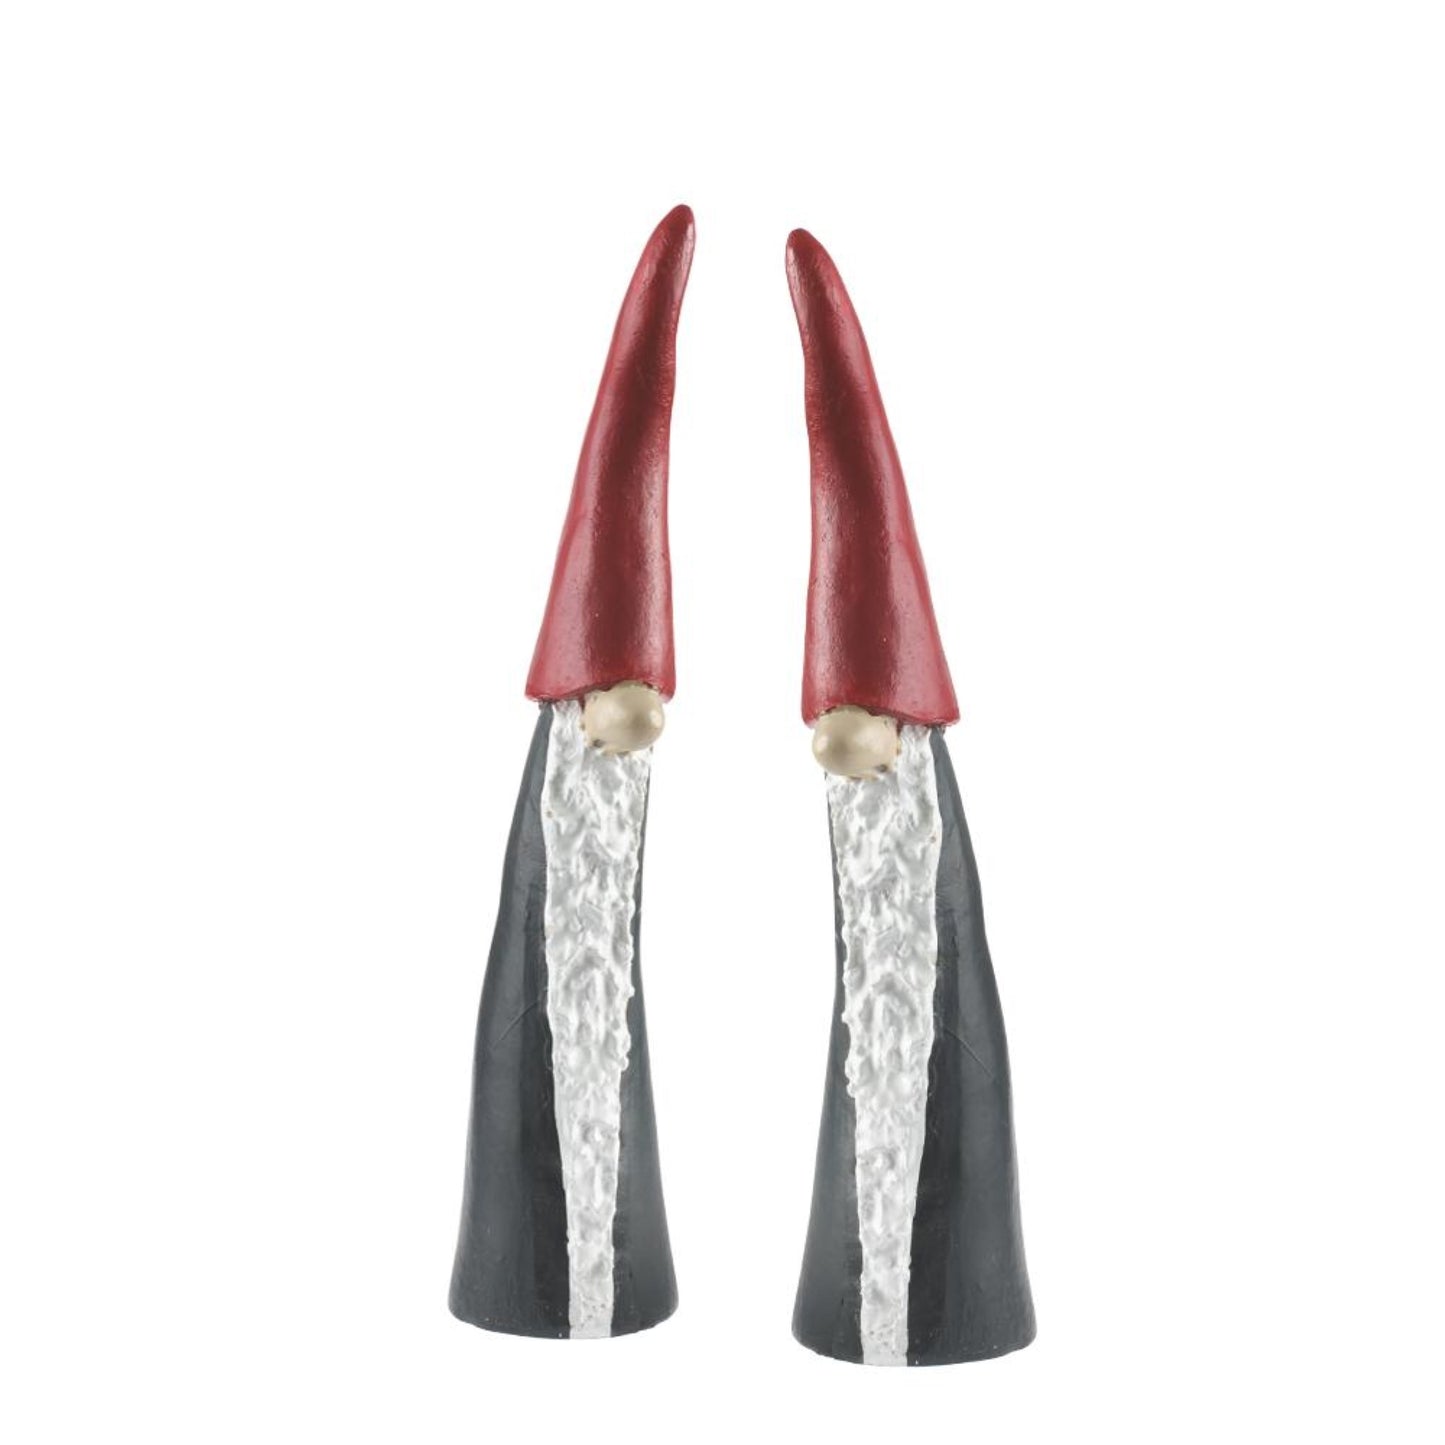 Tomte the Tall - set of 2